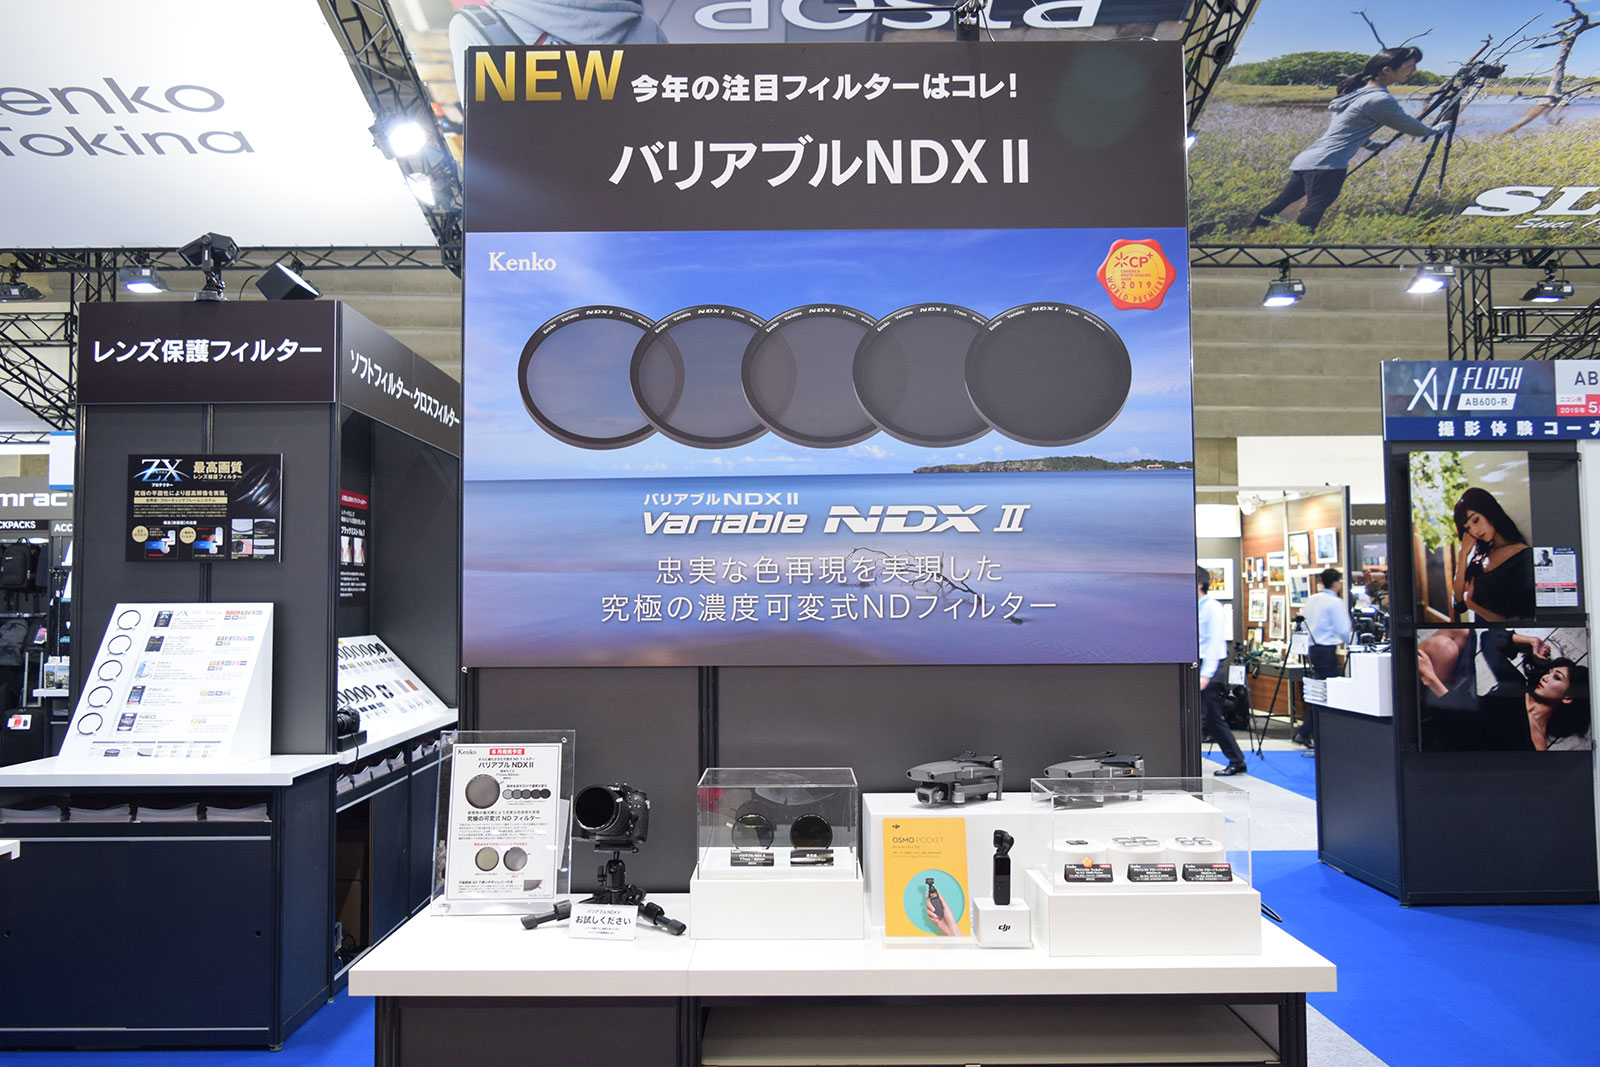 And speaking of ND filters, Kenko Filters corner presented the 2.0 version of its famous Variable NDX filter.